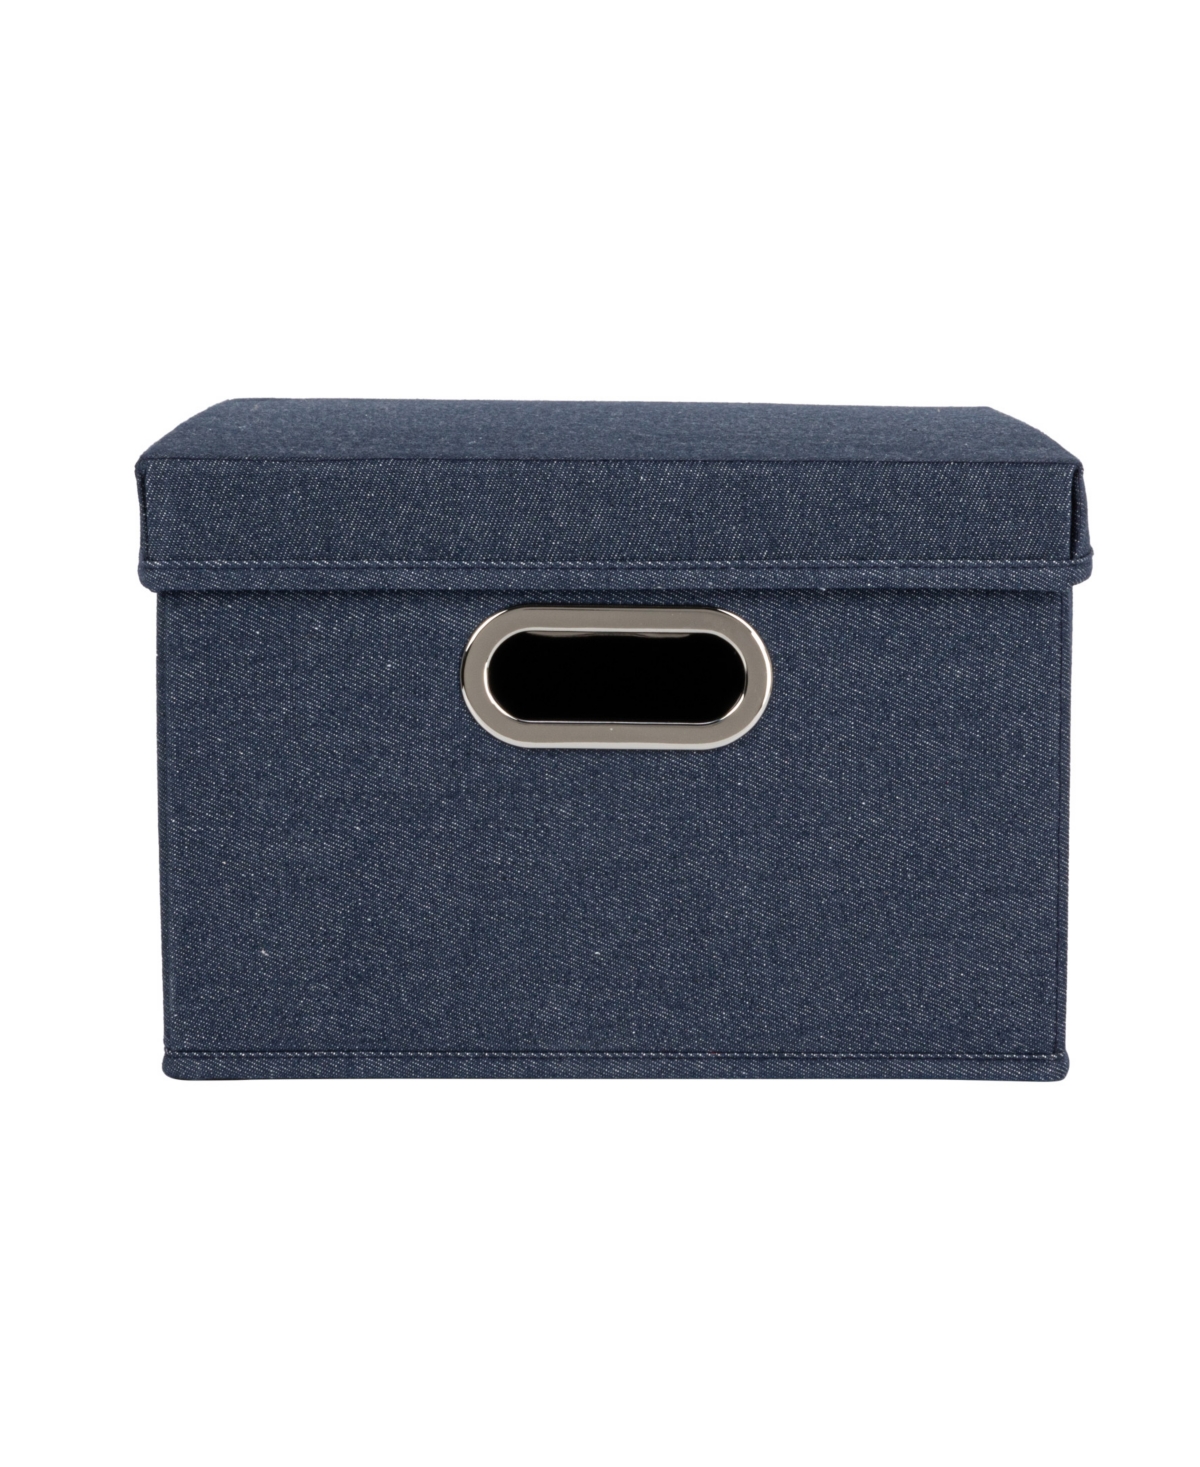 Shop Household Essentials Collapsible Cotton Blend Storage Box With Lid And Metal Grommet Handle, Set Of 2 In Blue